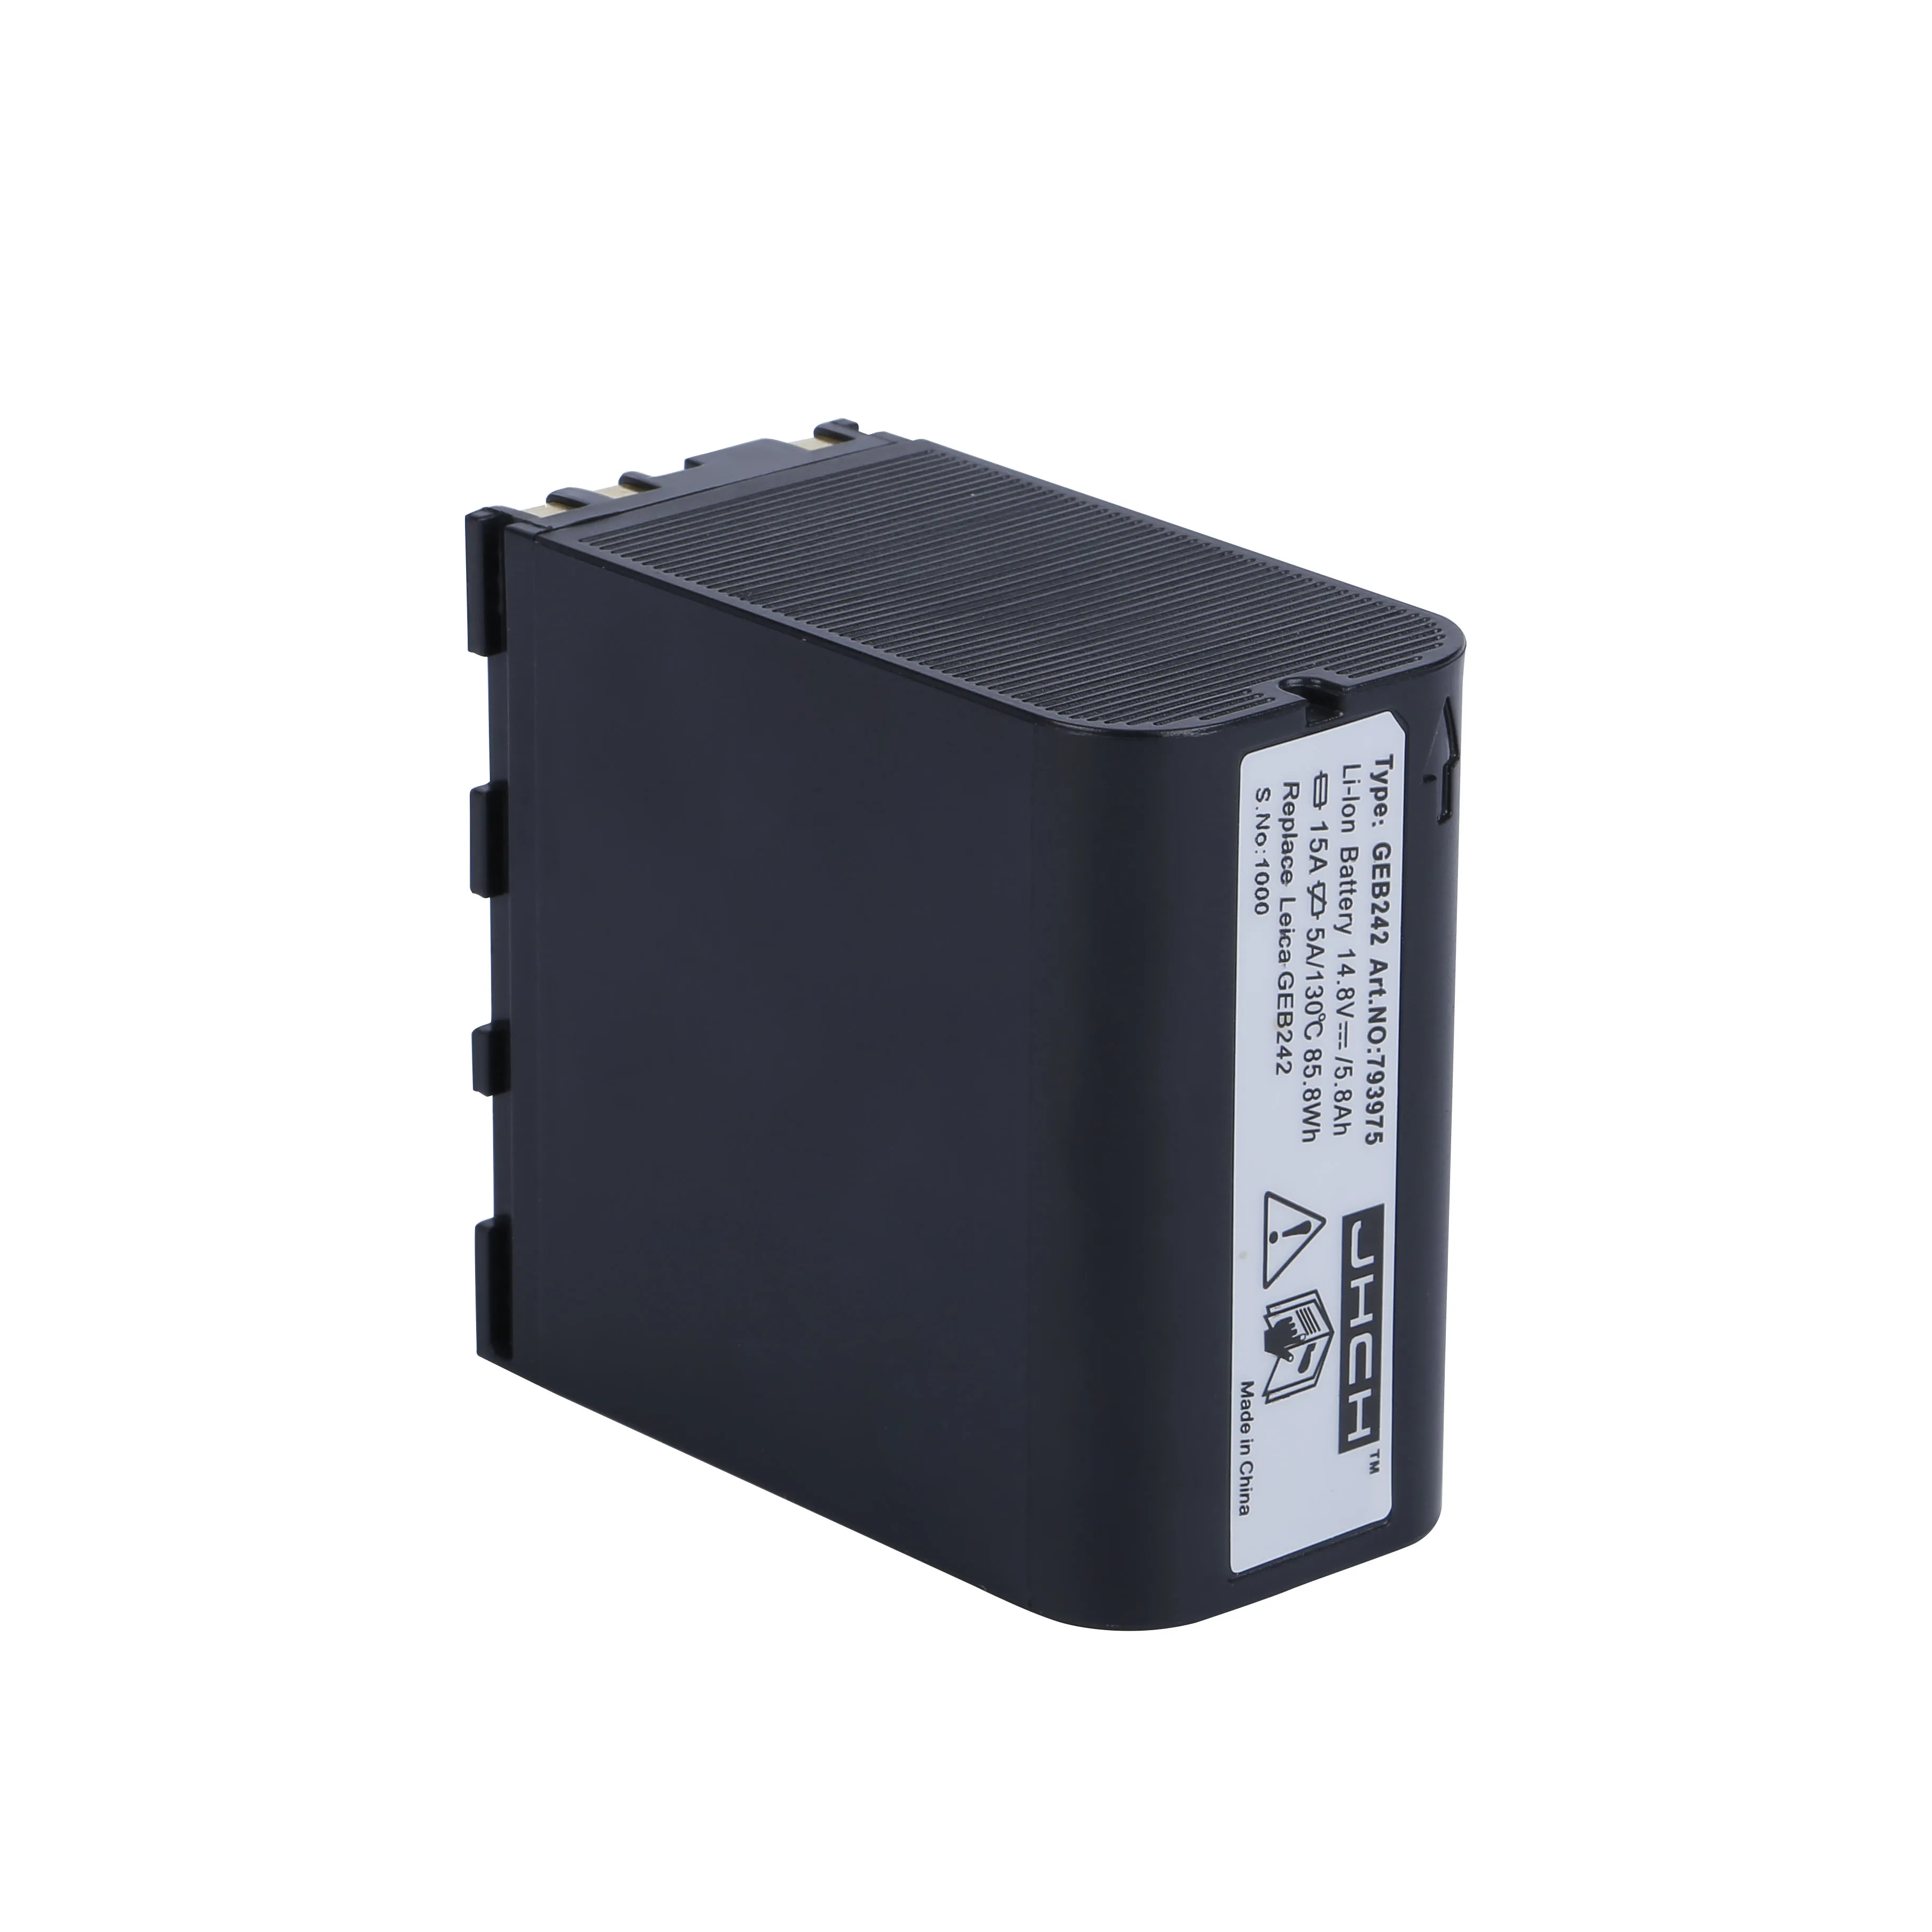 100% compatible GEB242 1/GEB241 14.8V 6000mAh Li-ion battery For Leica TS30 and TM30 total station | Электроника